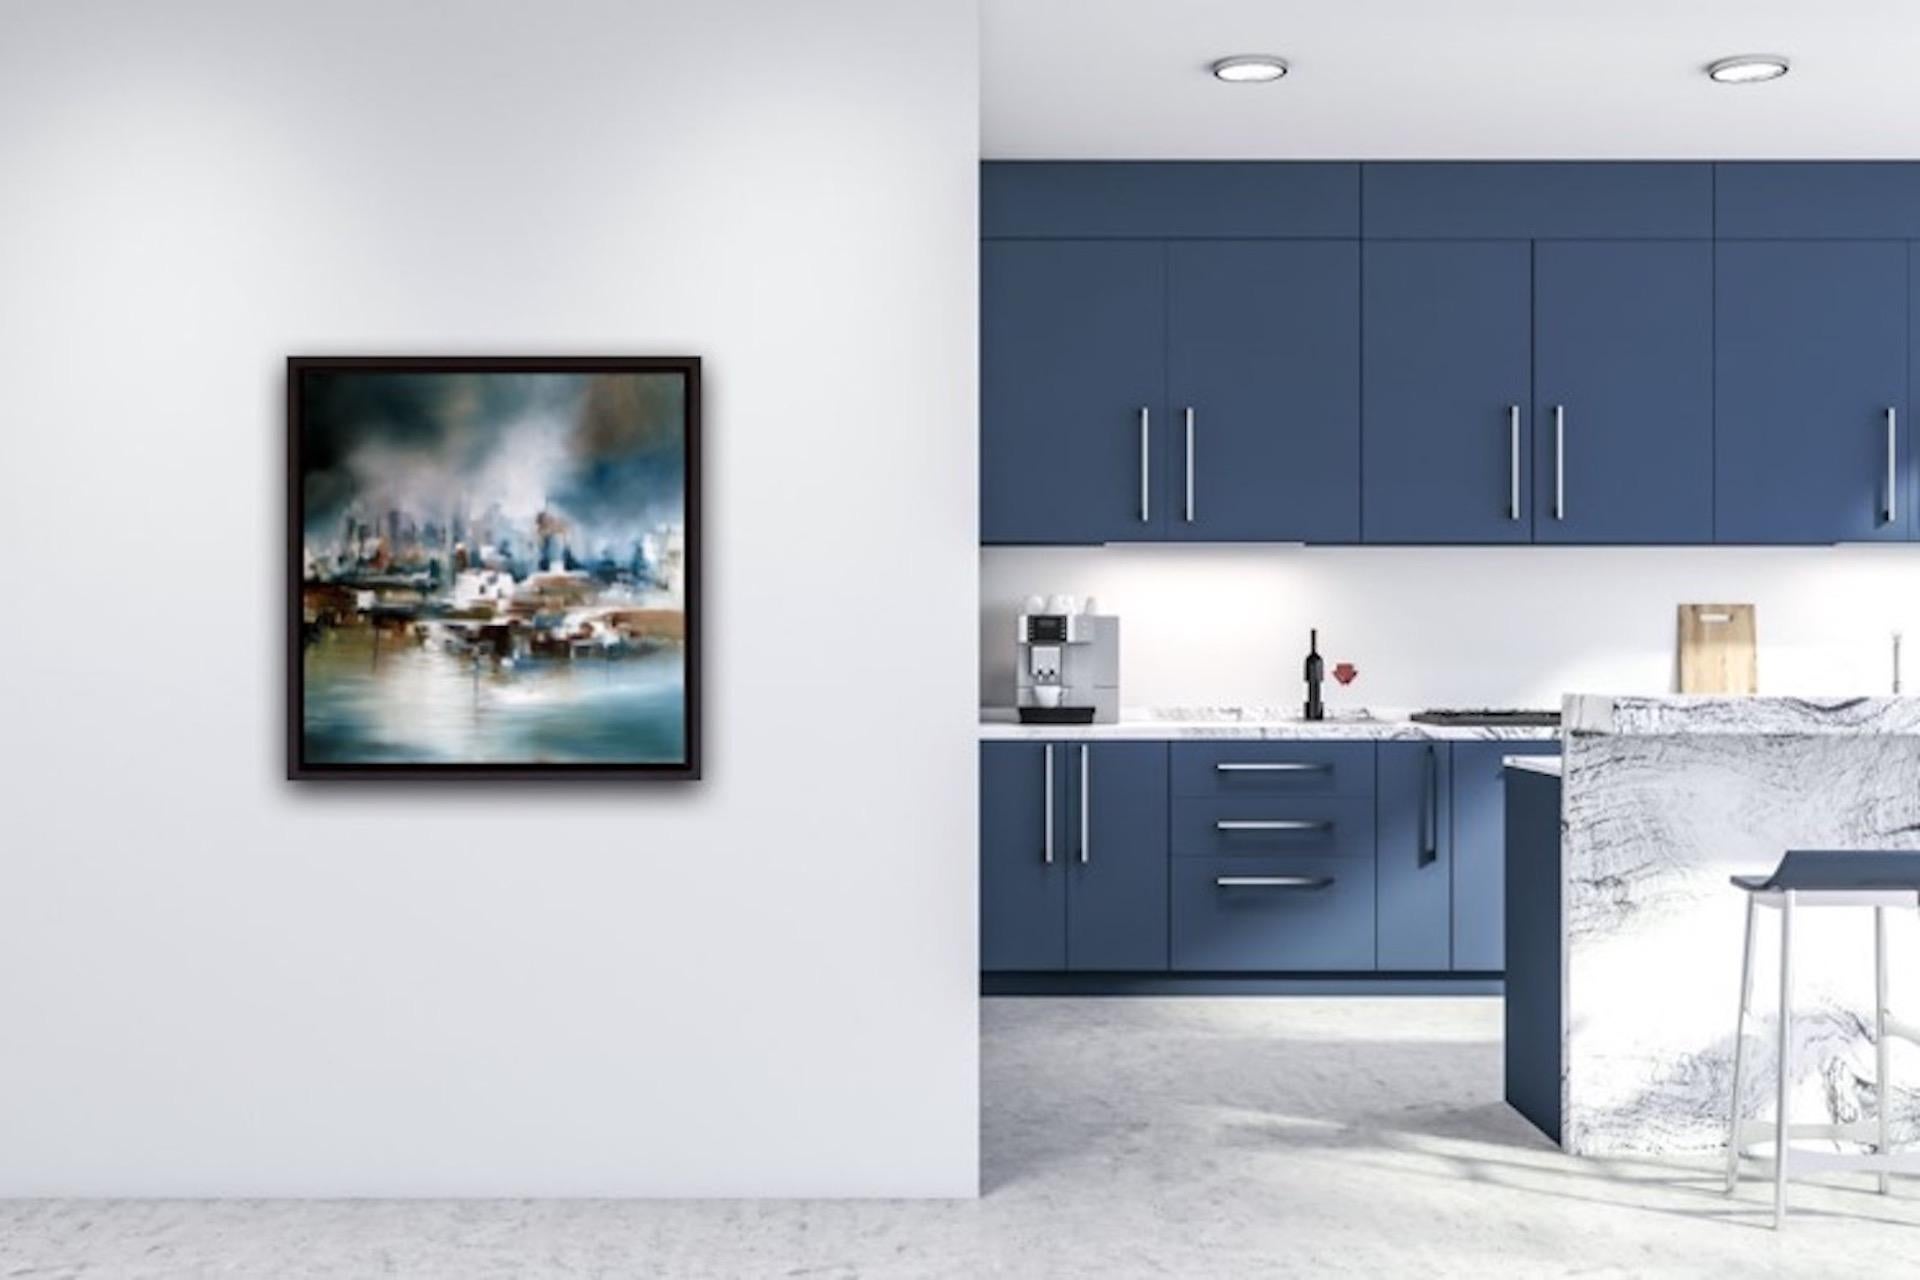 lison Johnson
City Side
Original Seascape Painting
Oil Paint on Canvas
Canvas Size: H 60cm x W 60cm
Sold Unframed
Ready to Hang
Please note that in situ images are purely an indication of how a piece may look.

City Side is an original cityscape